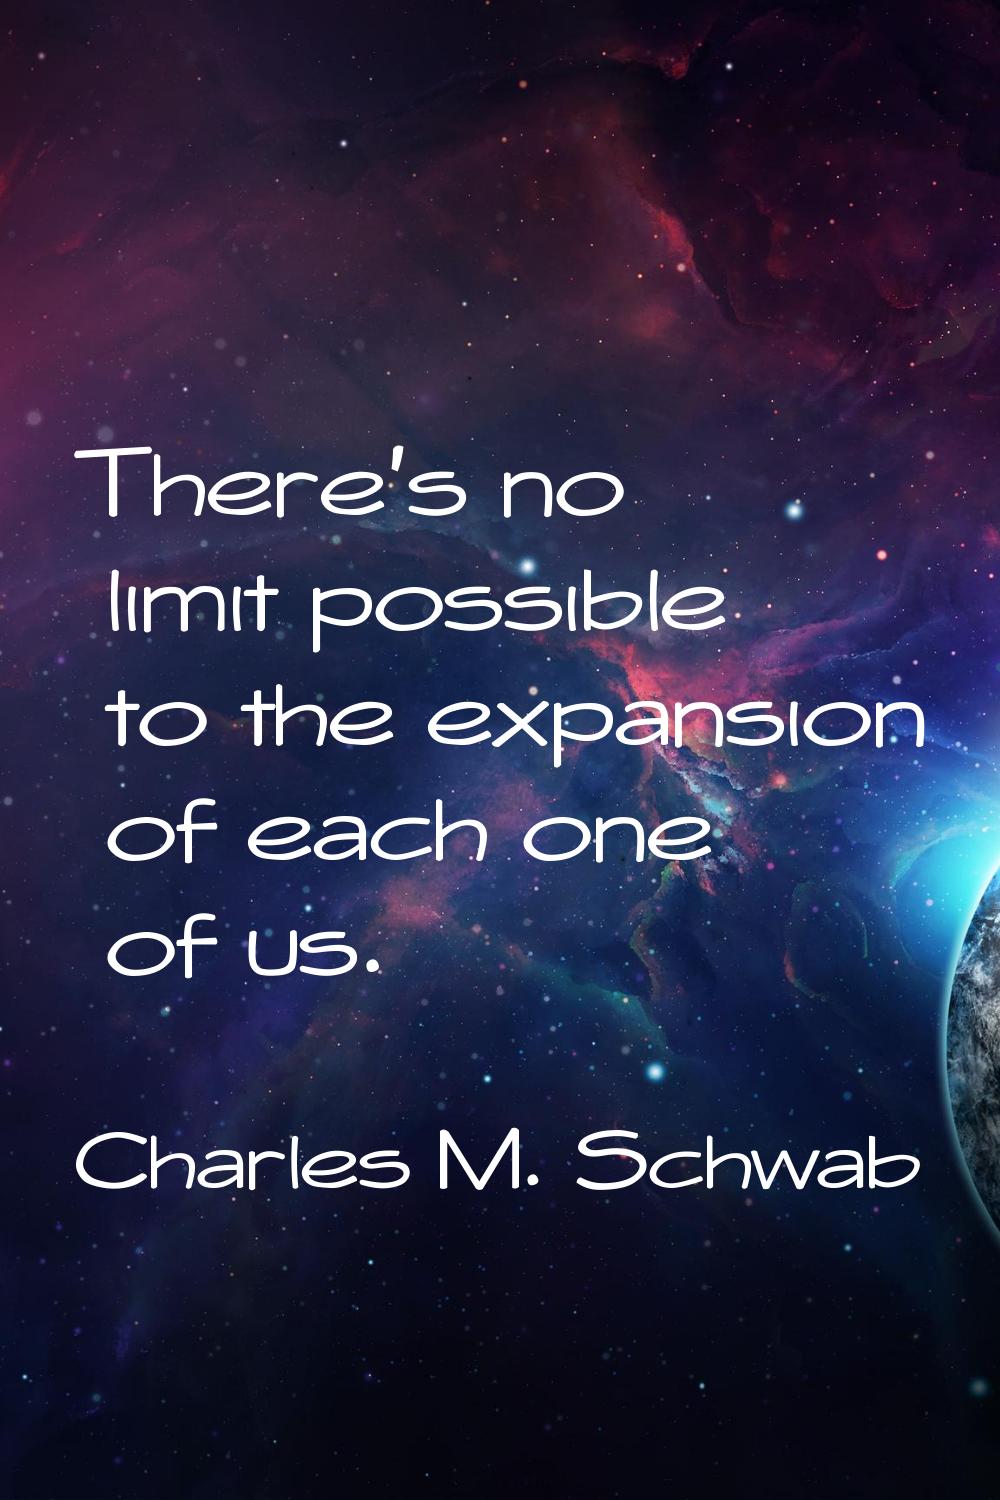 There's no limit possible to the expansion of each one of us.